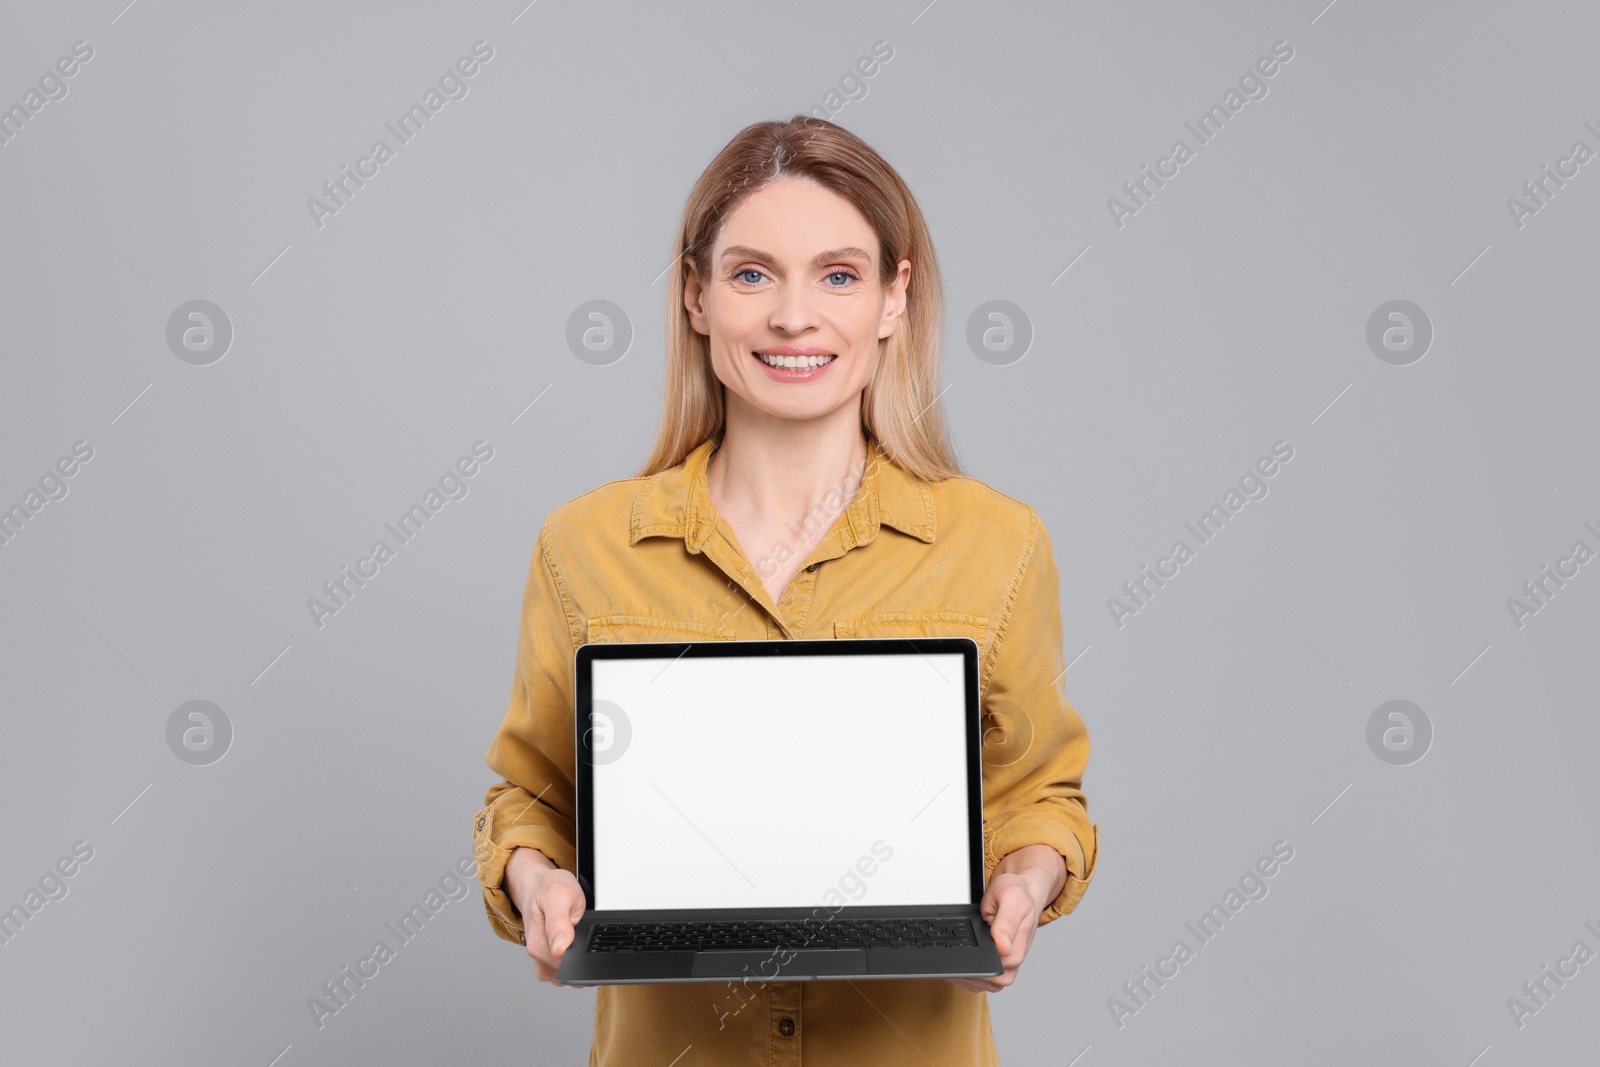 Photo of Happy woman showing laptop on light grey background